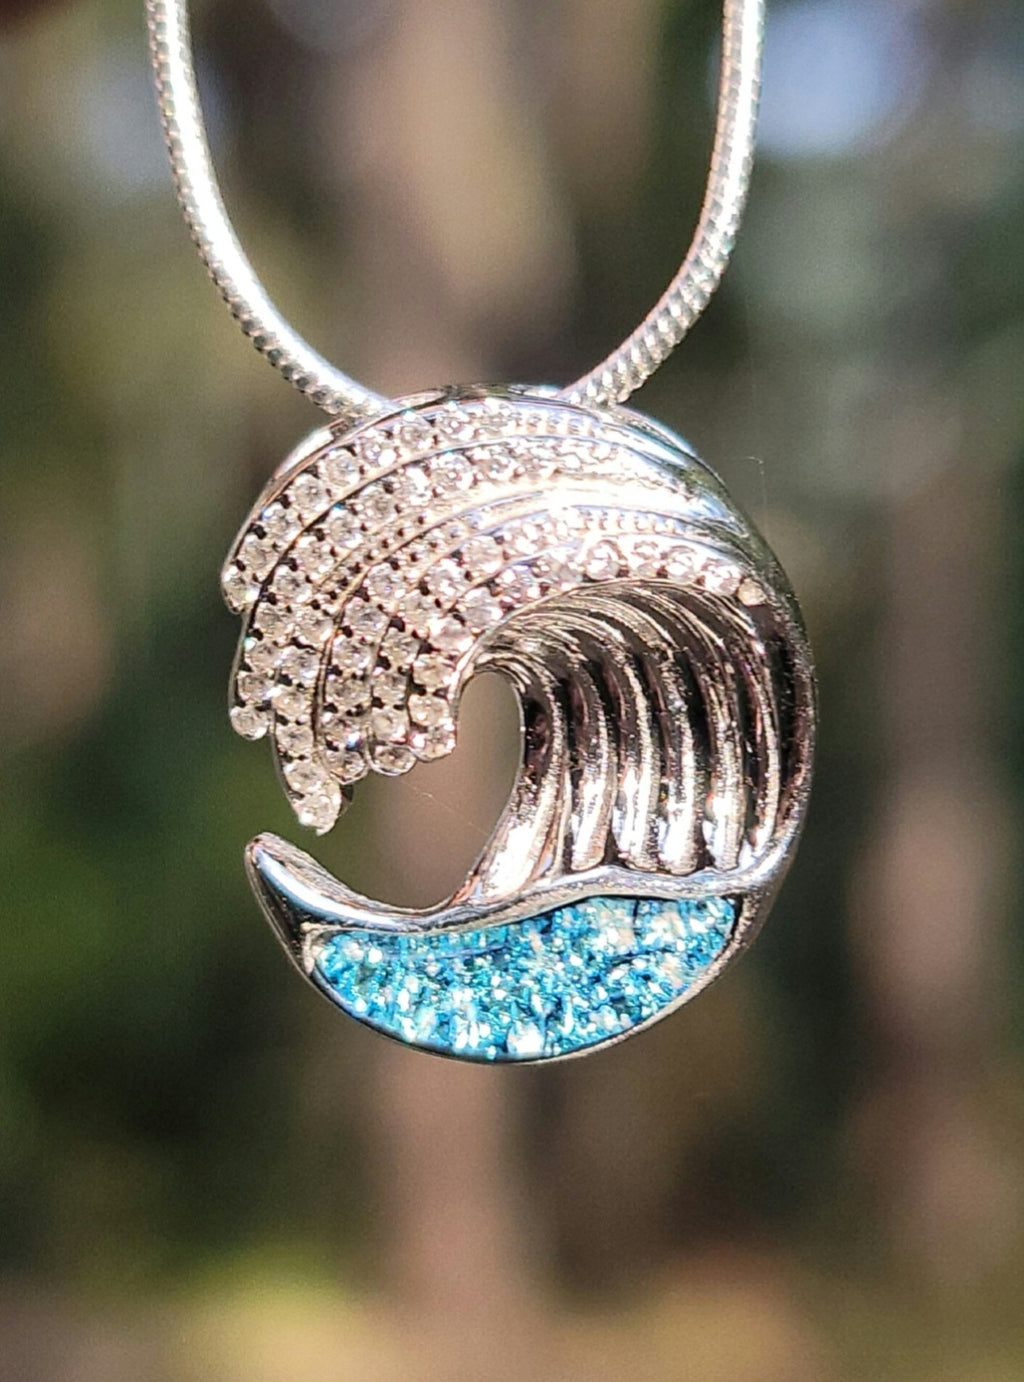 NEW 3D Ocean Wave Cremation Jewelry Pendant Ashes InFused Ocean Beach Urn Necklace CZ Paved Waves